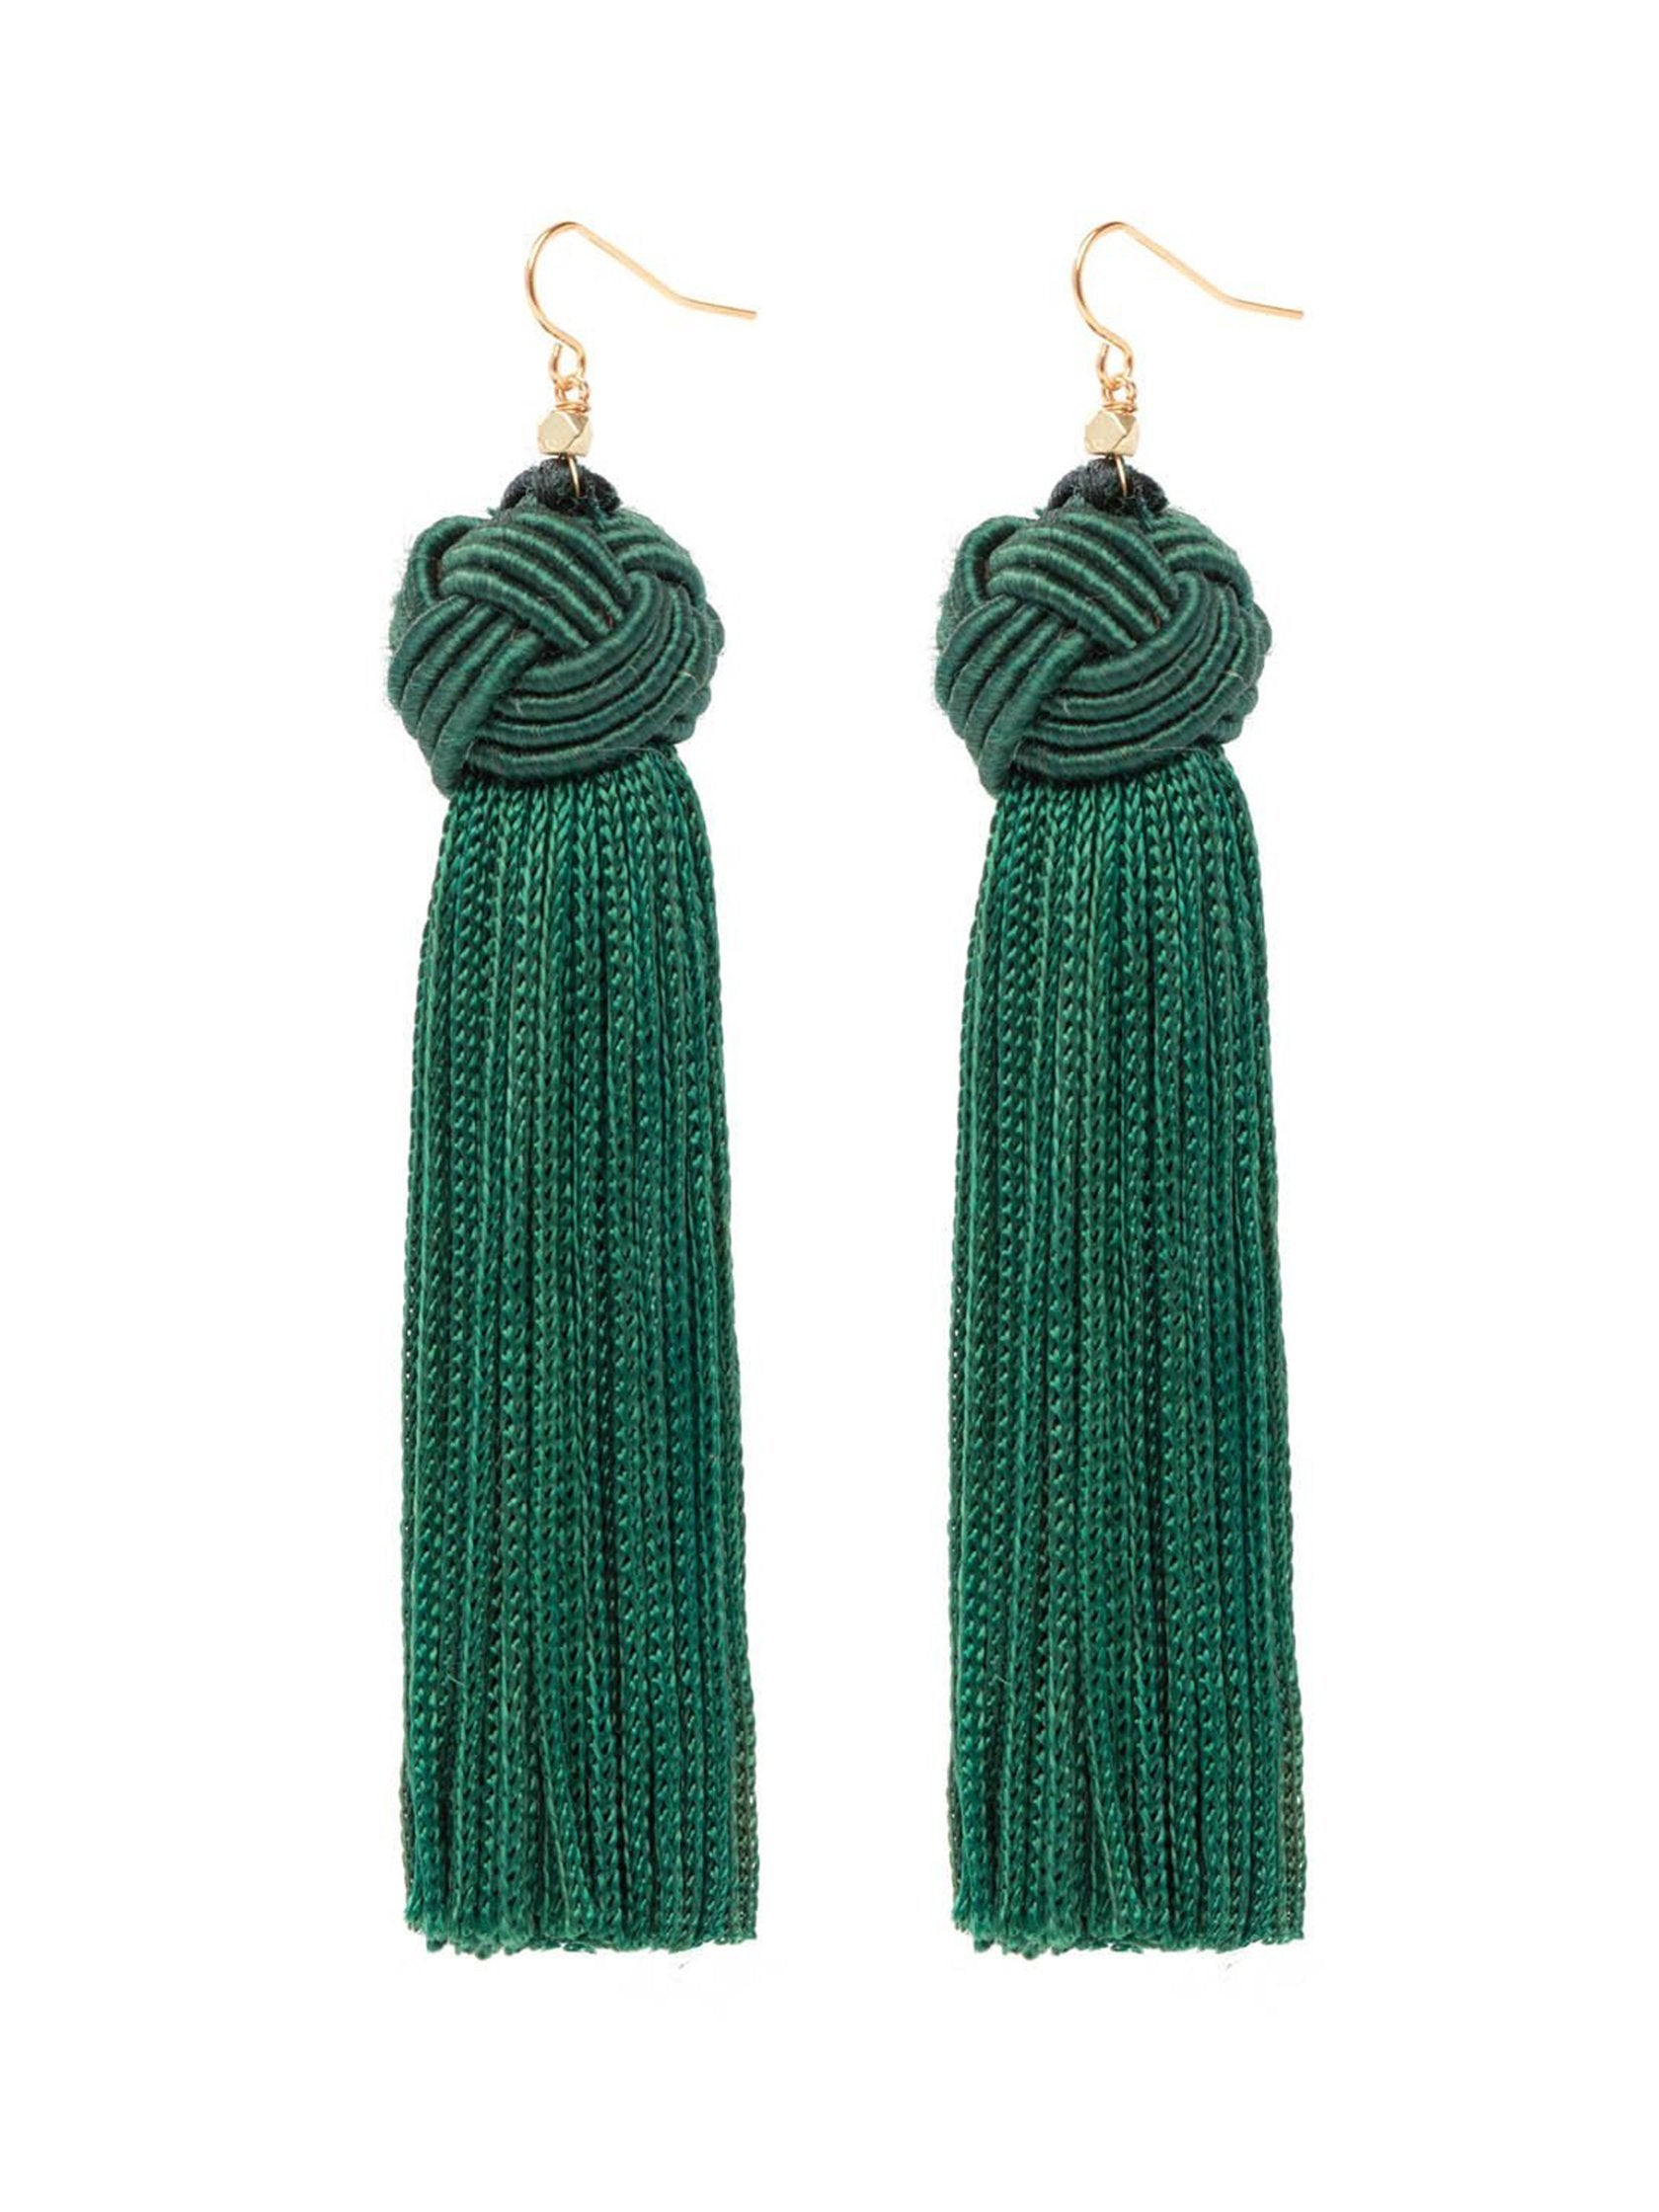 Women outfit in a earrings rental from Vanessa Mooney called Astrid Knotted Tassel Earring